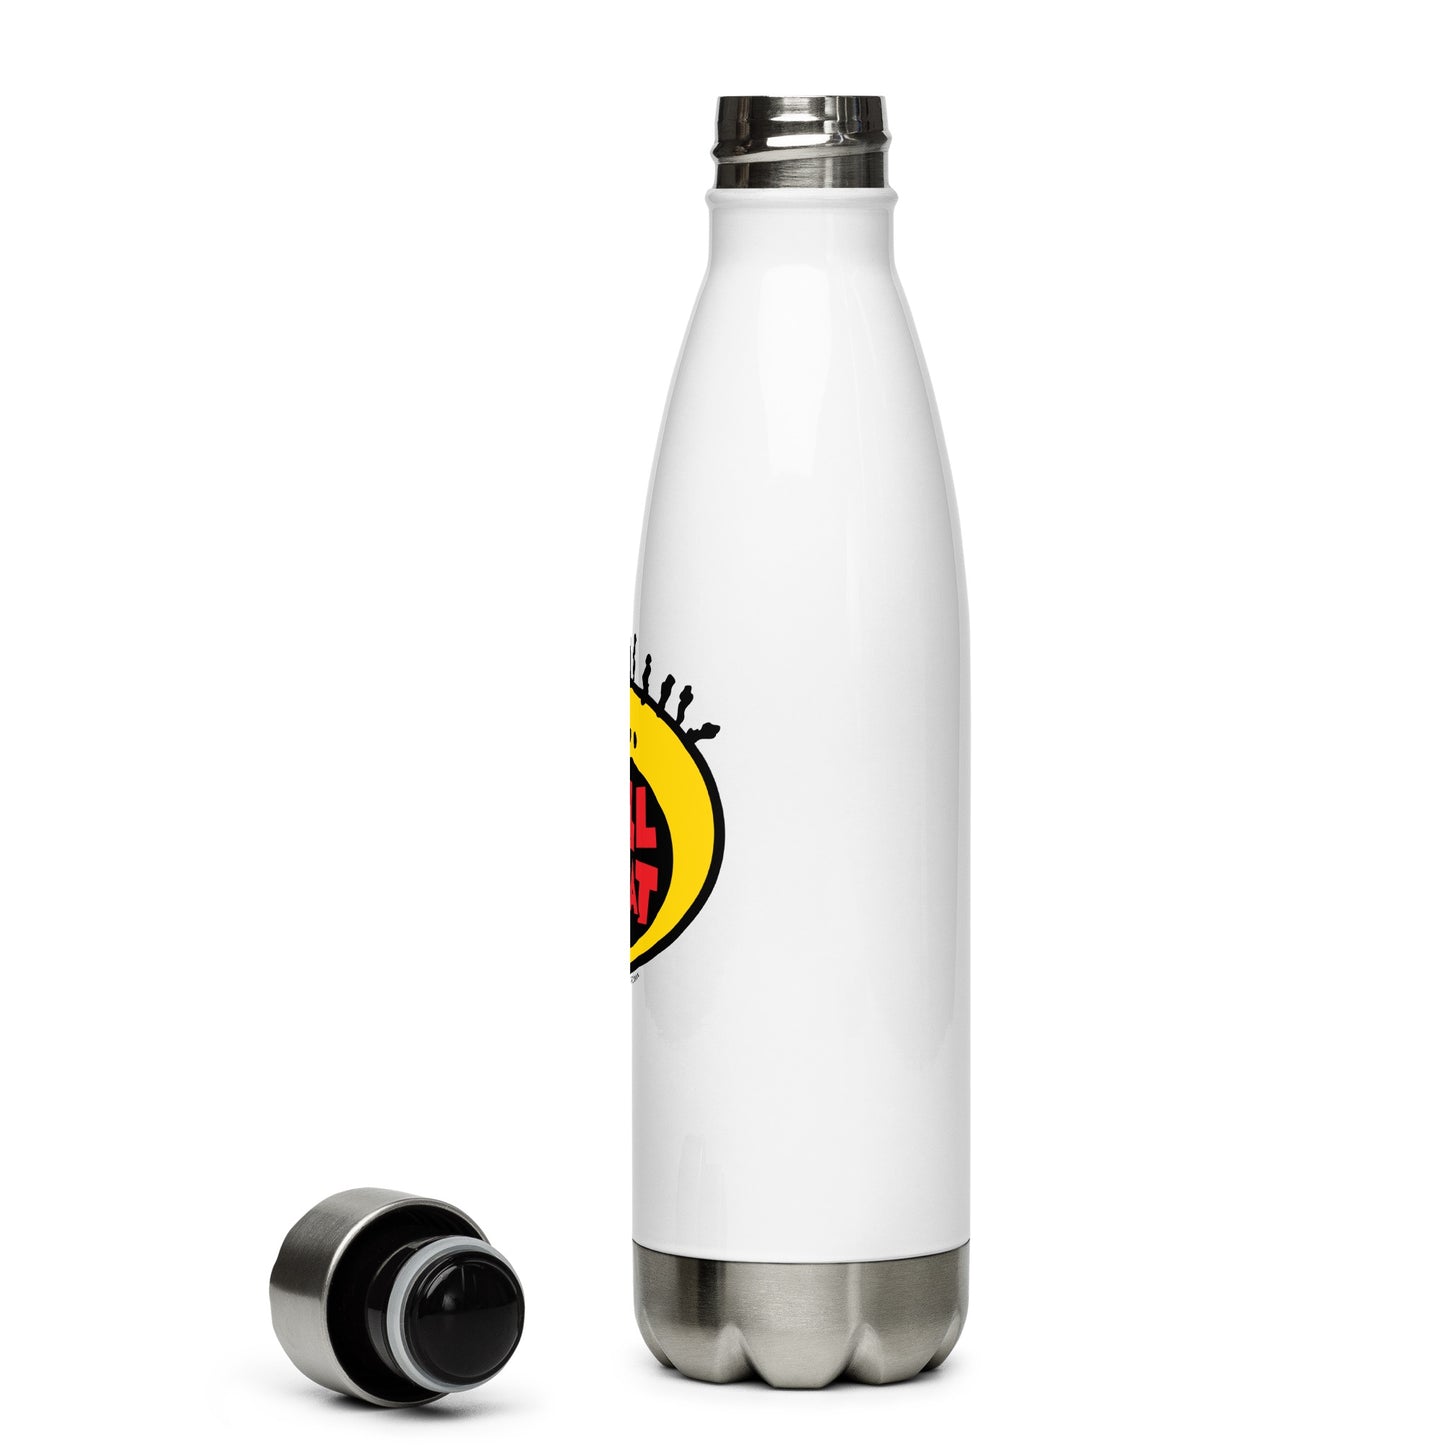 All That Original Logo Stainless Steel Water Bottle